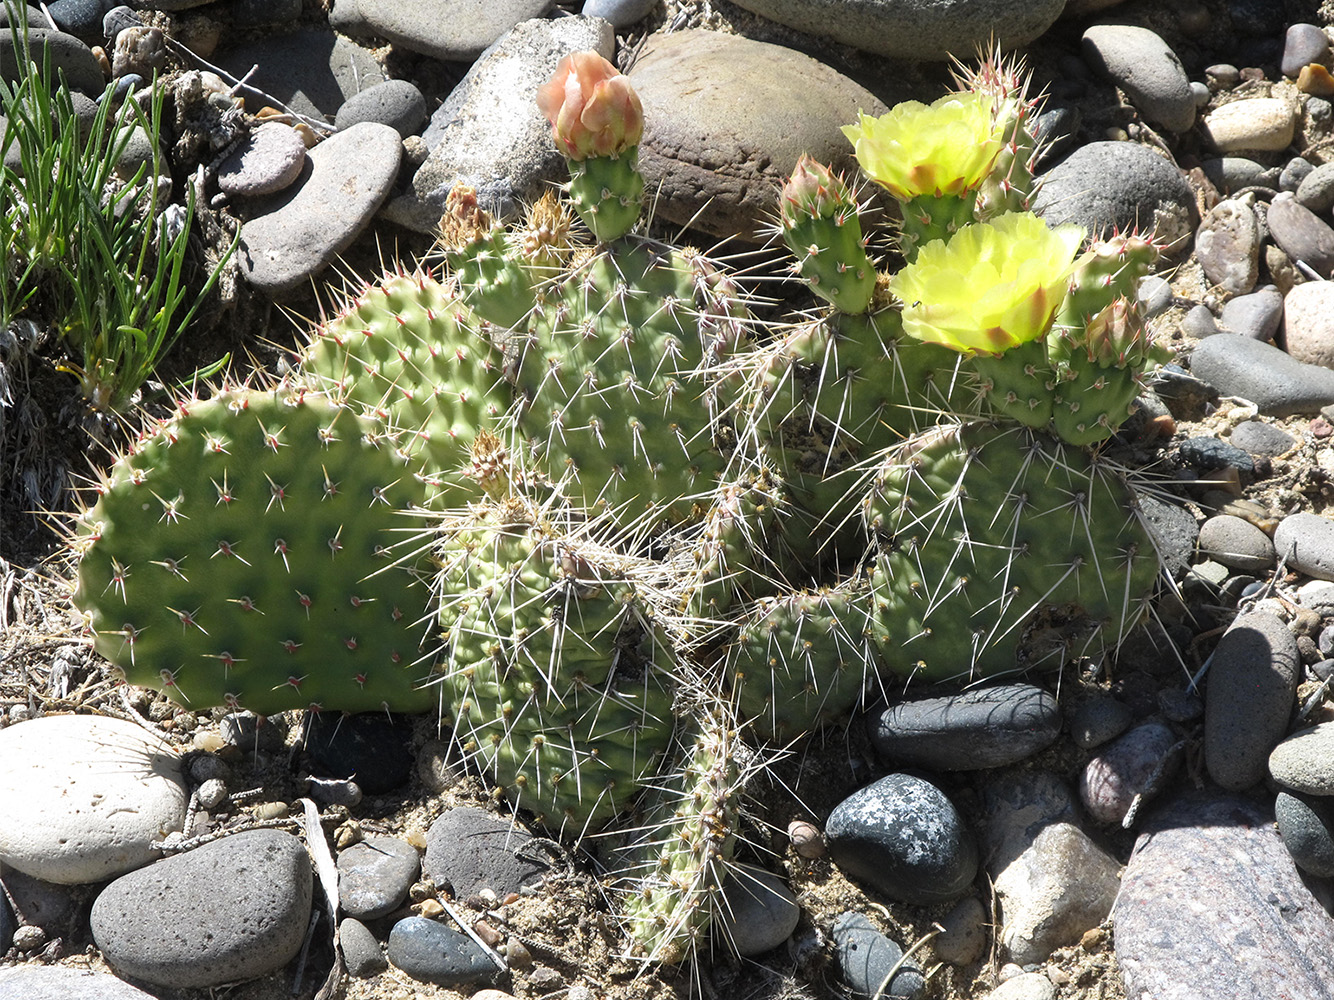 Side view of spiny cactus with flat pads, yellow flower and orange flower bud growing among smooth rocks.